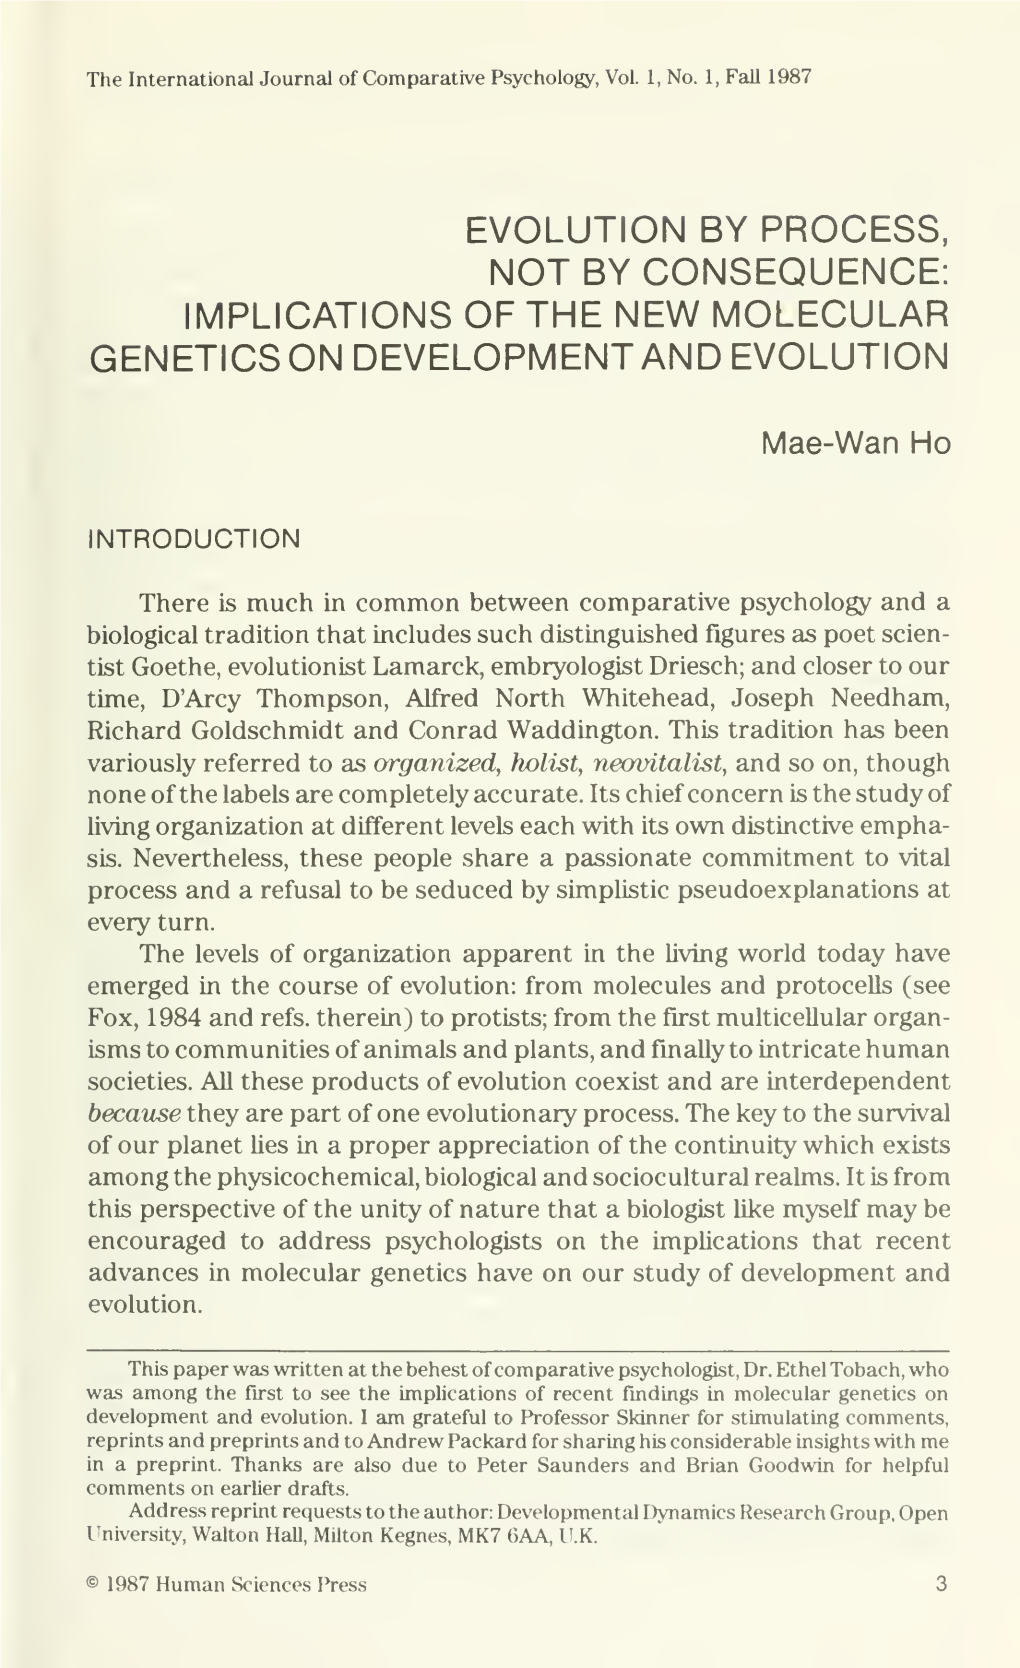 Evolution by Process. Not by Consequence: Implications of the New Molecular Geneticson Development and Evolution